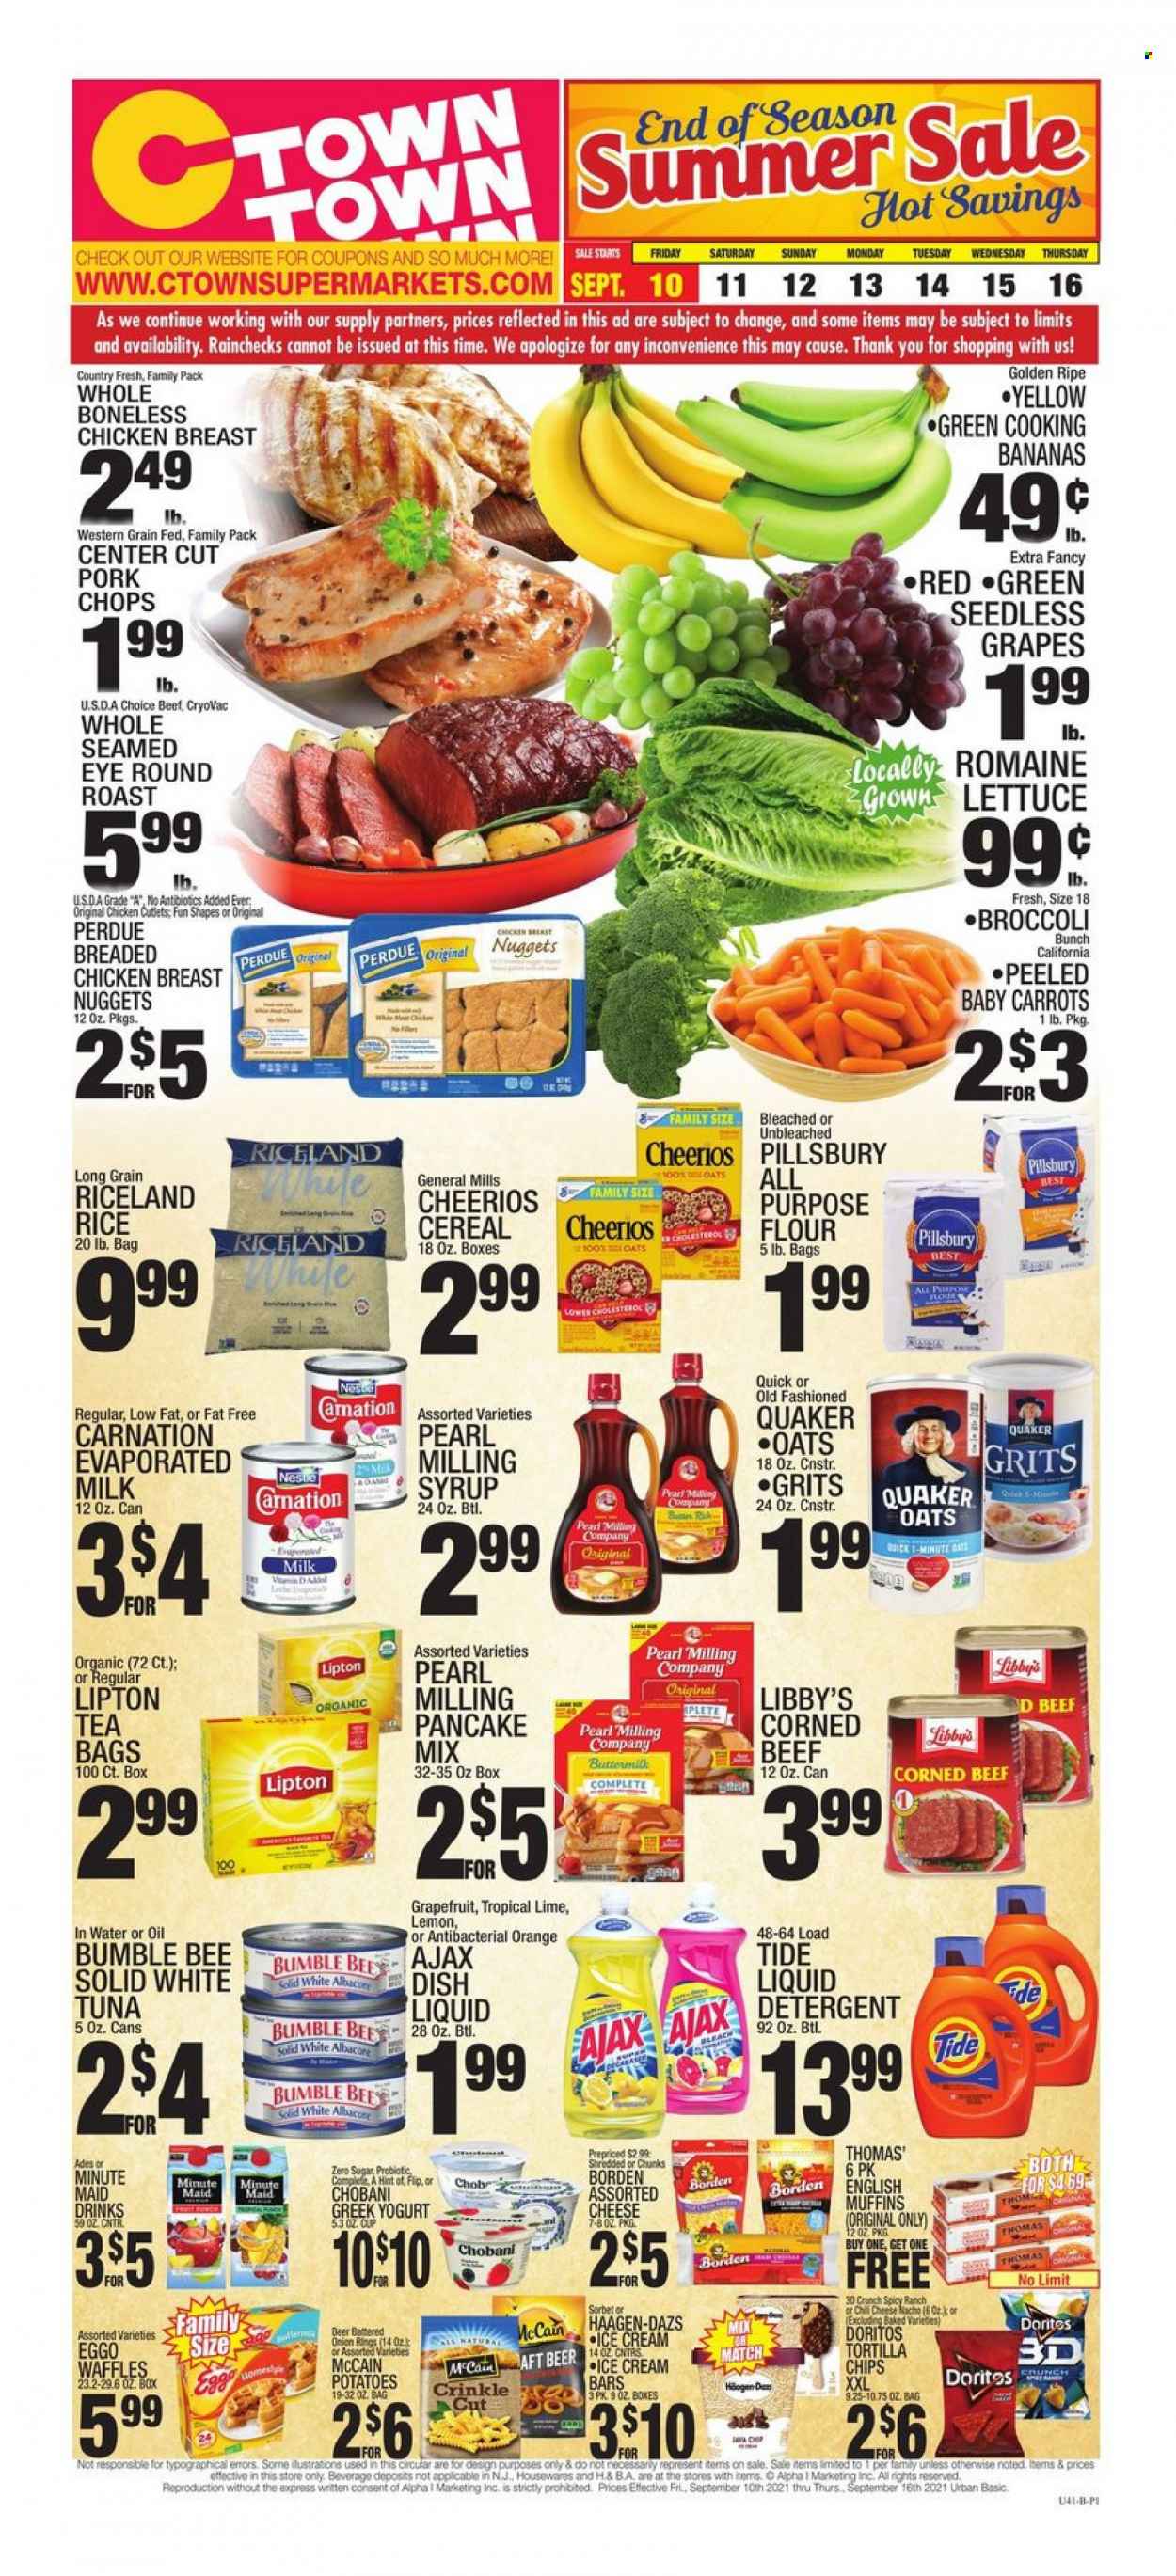 thumbnail - C-Town Flyer - 09/10/2021 - 09/16/2021 - Sales products - seedless grapes, english muffins, waffles, broccoli, carrots, potatoes, lettuce, grapefruits, grapes, oranges, tuna, onion rings, nuggets, Bumble Bee, fried chicken, pancakes, Pillsbury, chicken nuggets, Quaker, Perdue®, corned beef, greek yoghurt, yoghurt, Chobani, buttermilk, evaporated milk, ice cream, ice cream bars, Häagen-Dazs, McCain, crinkle fries, Doritos, tortilla chips, chips, all purpose flour, oats, grits, cereals, Cheerios, rice, spice, syrup, Lipton, fruit punch, tea bags, beer, chicken cutlets, beef meat, round roast. Page 1.